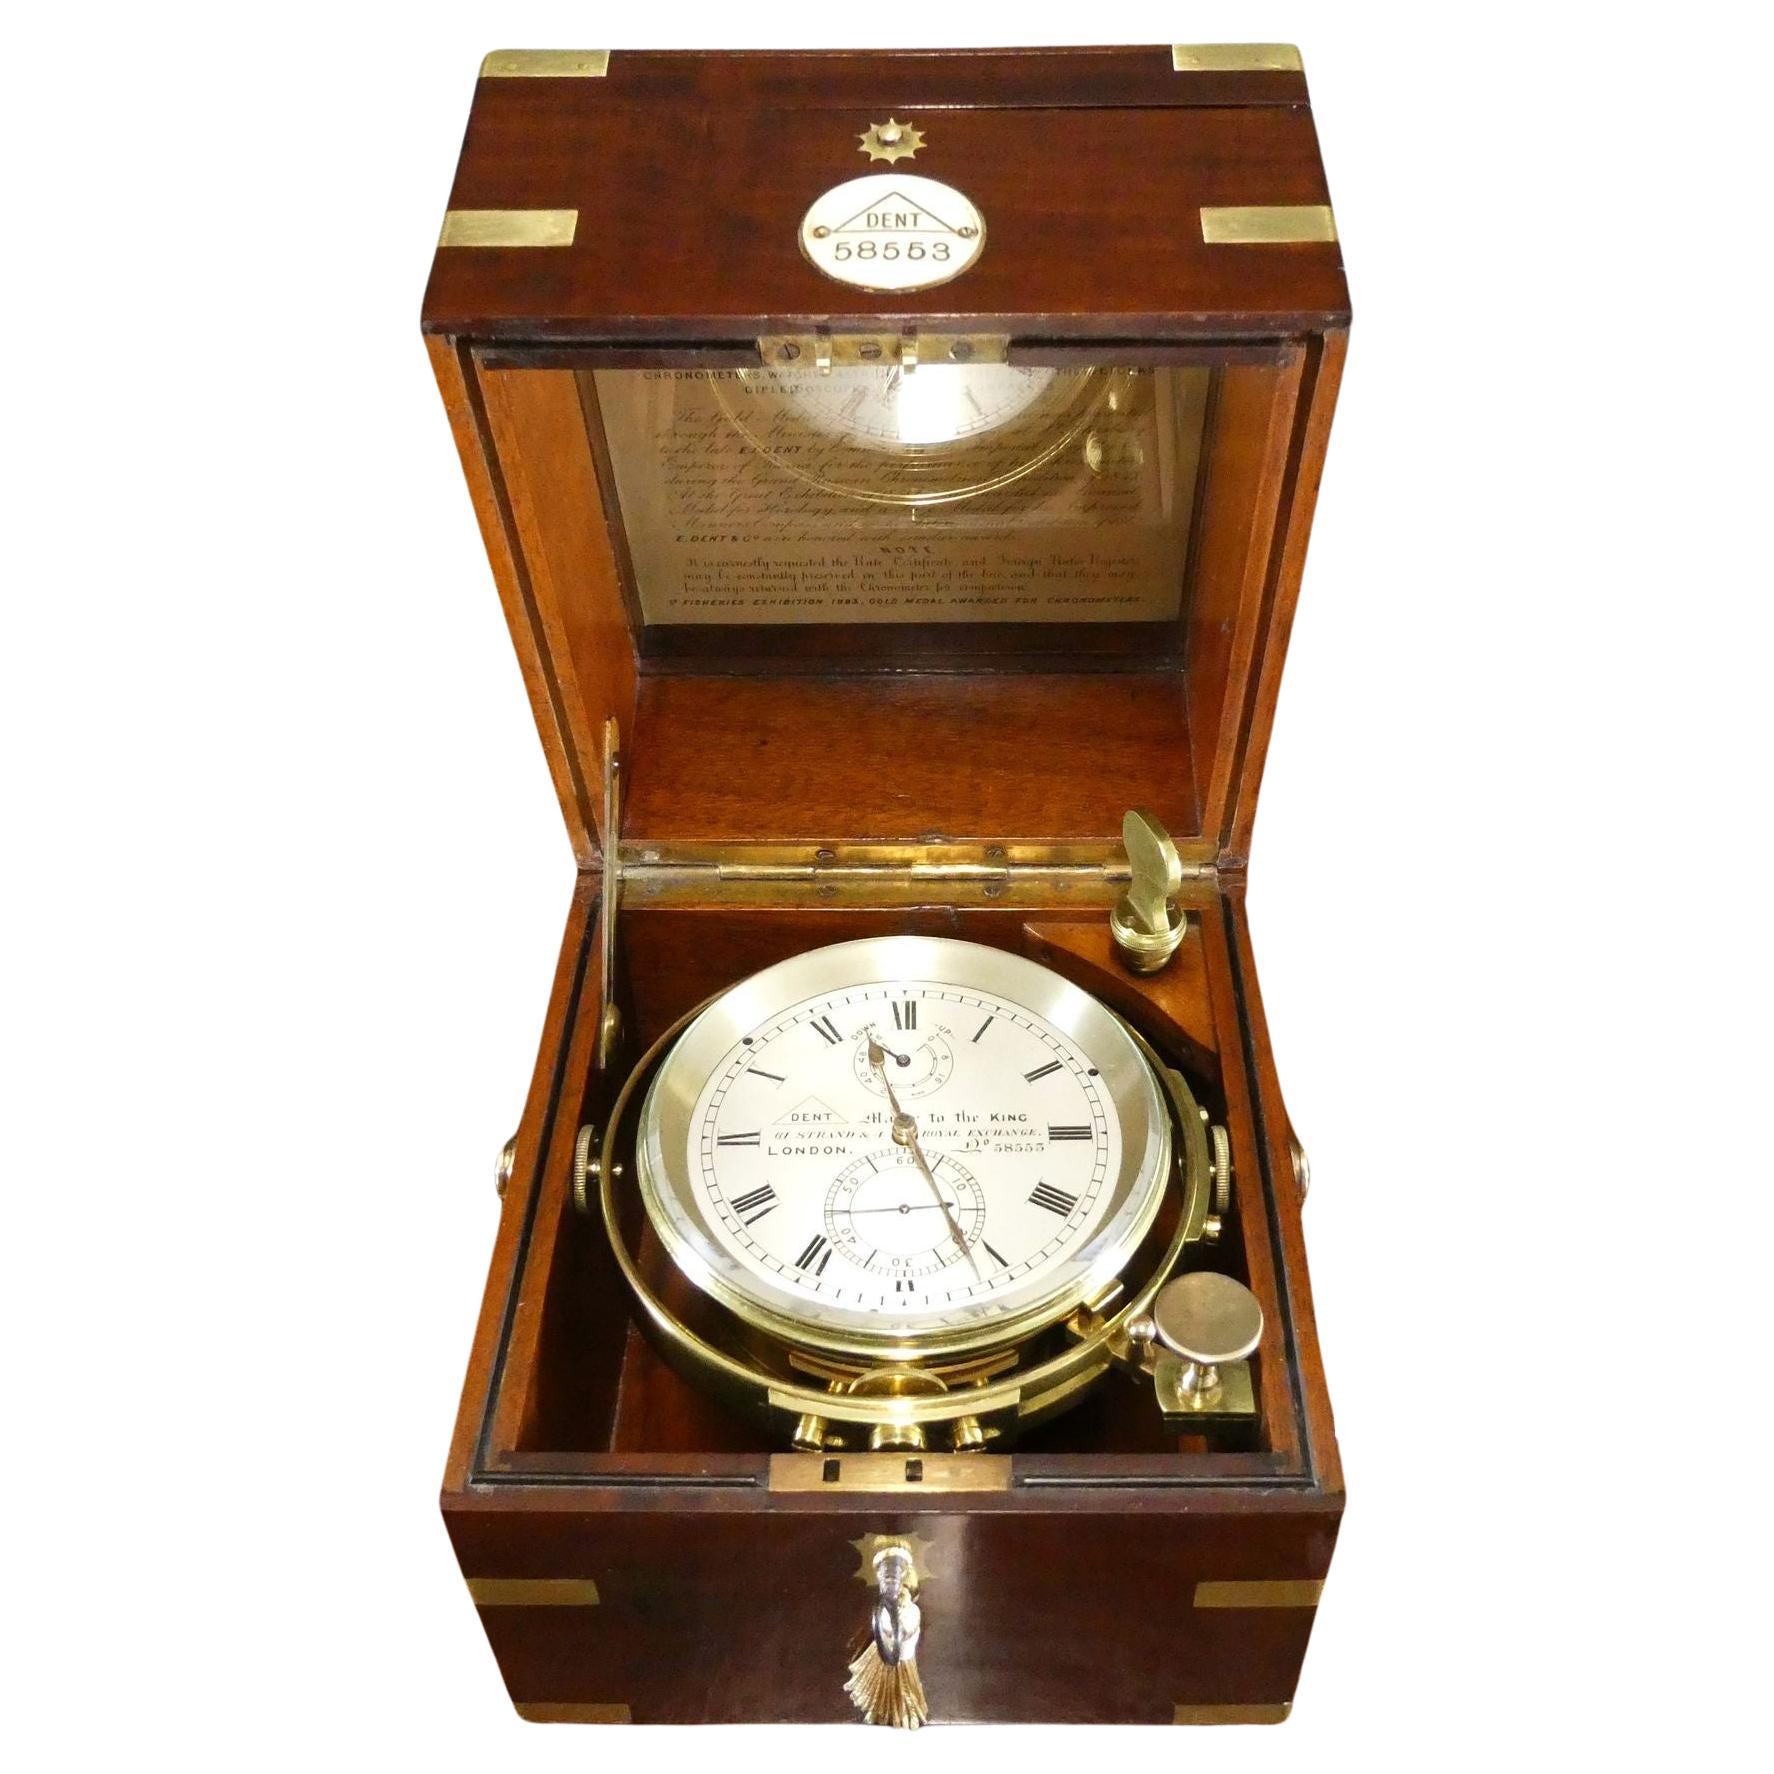 Fine Two Day Marine Chronometer by Dent, London. No58553 For Sale